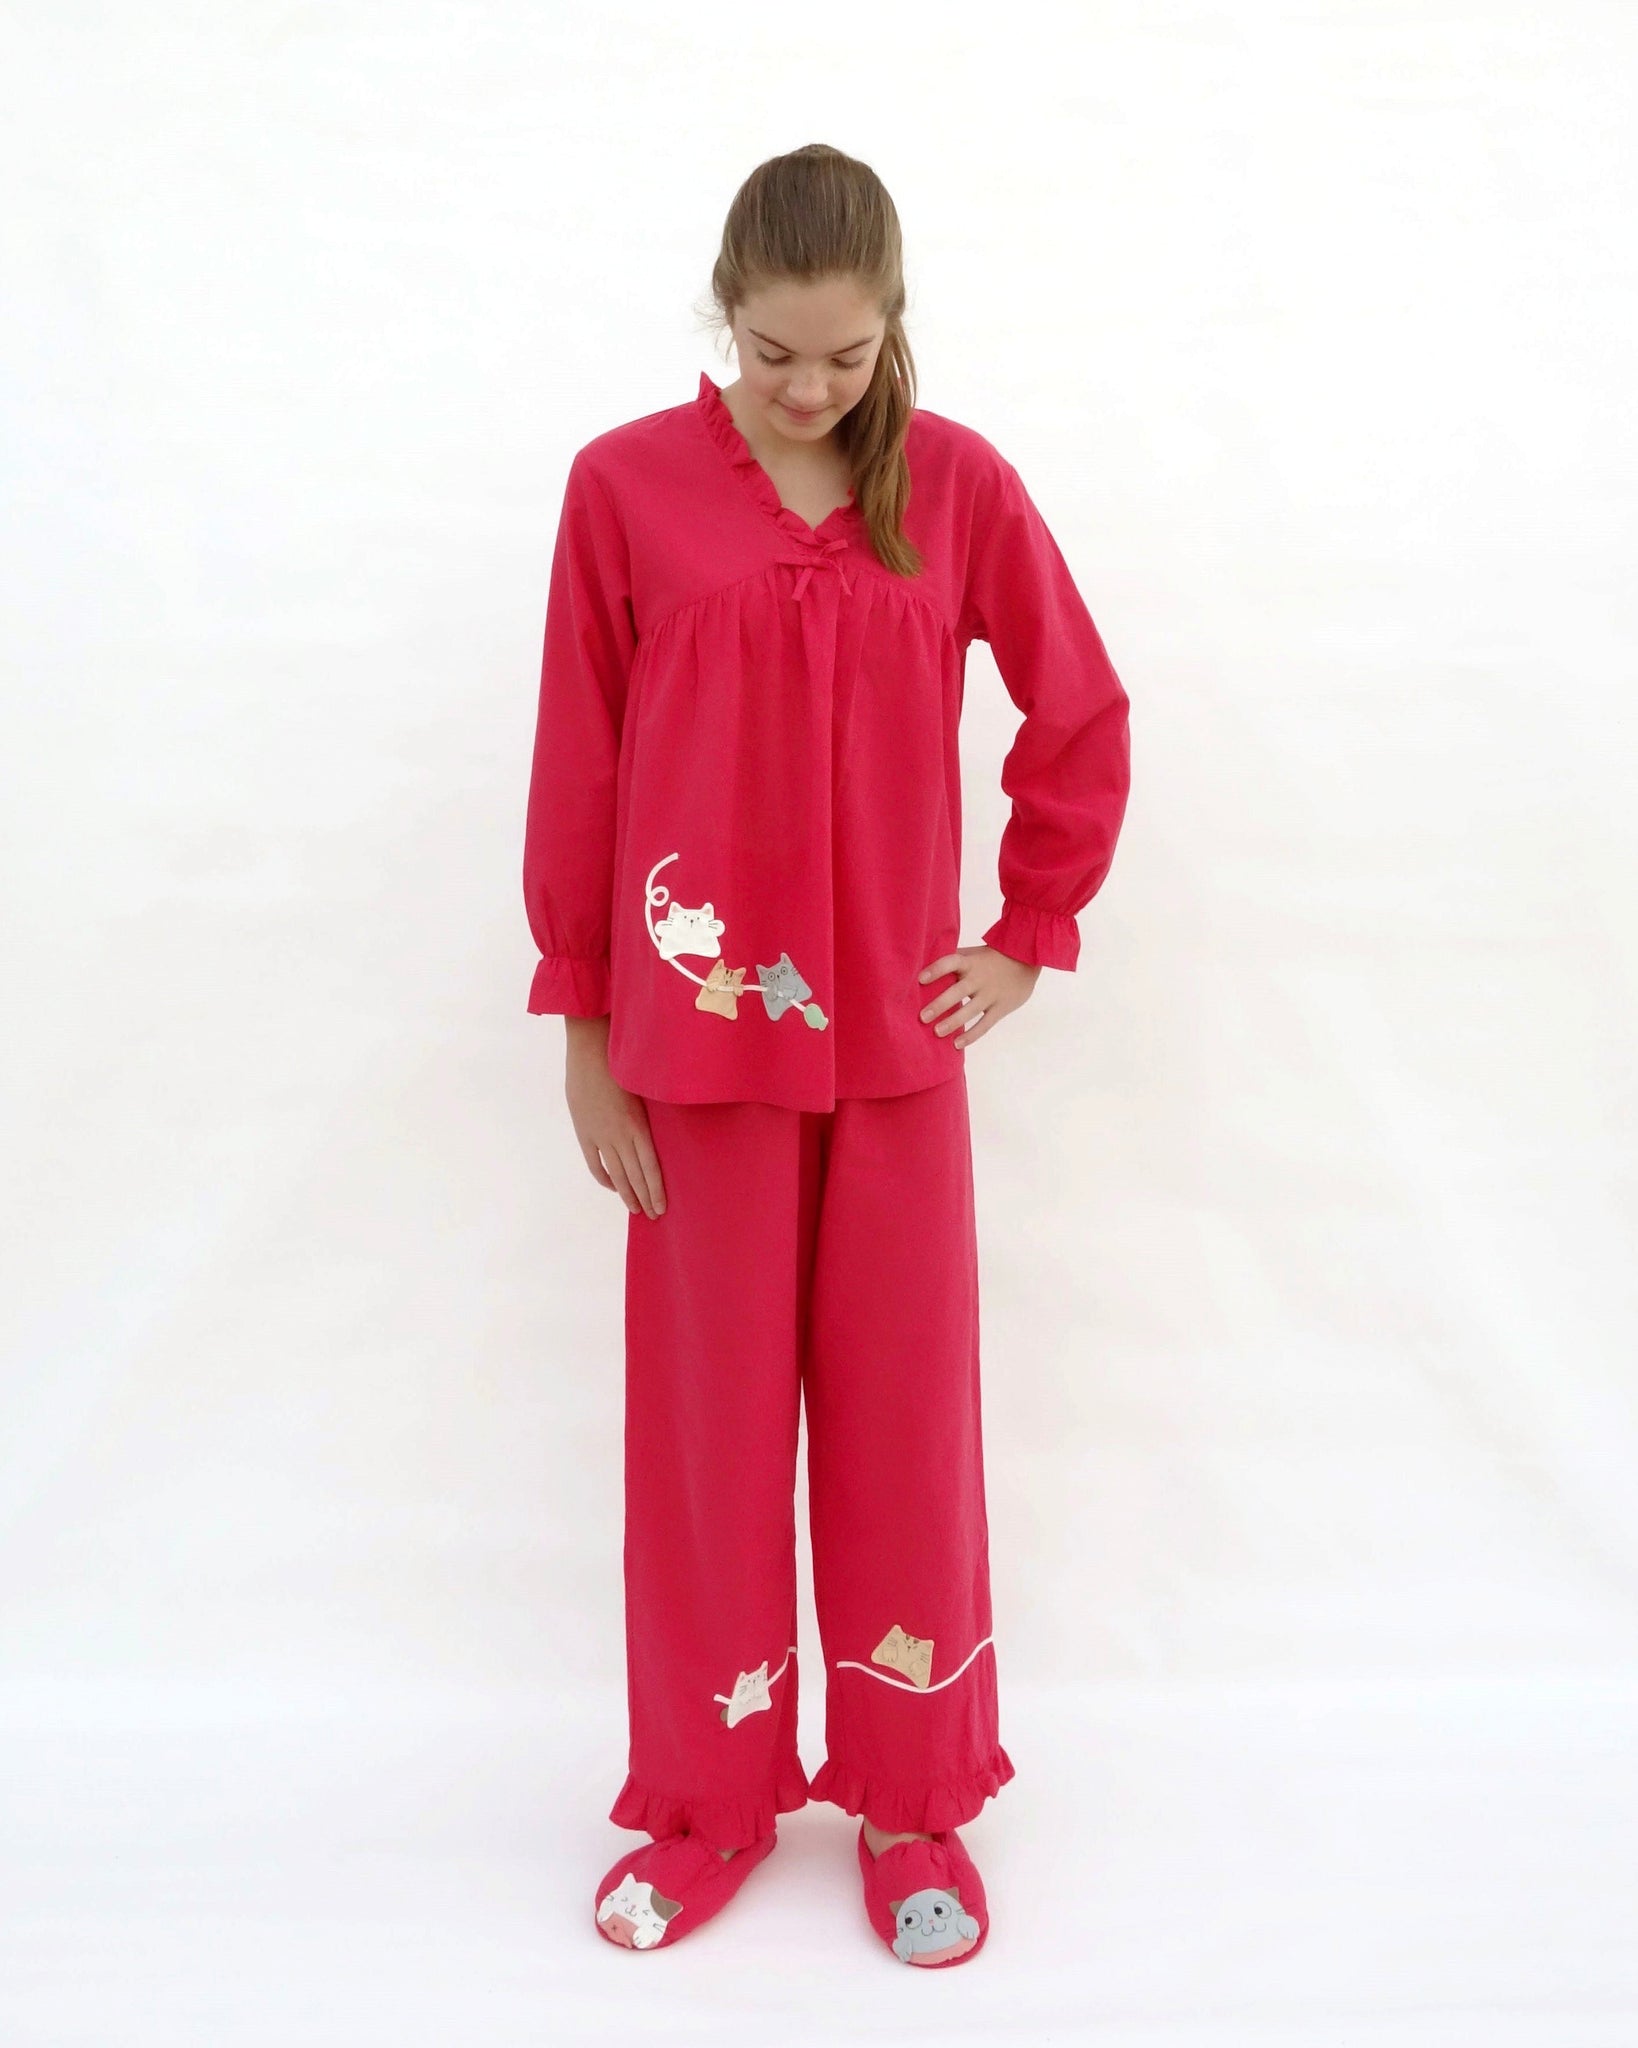 Women wearing red pajamas with cat appliqué, embroidery details, and matching slippers in front view.